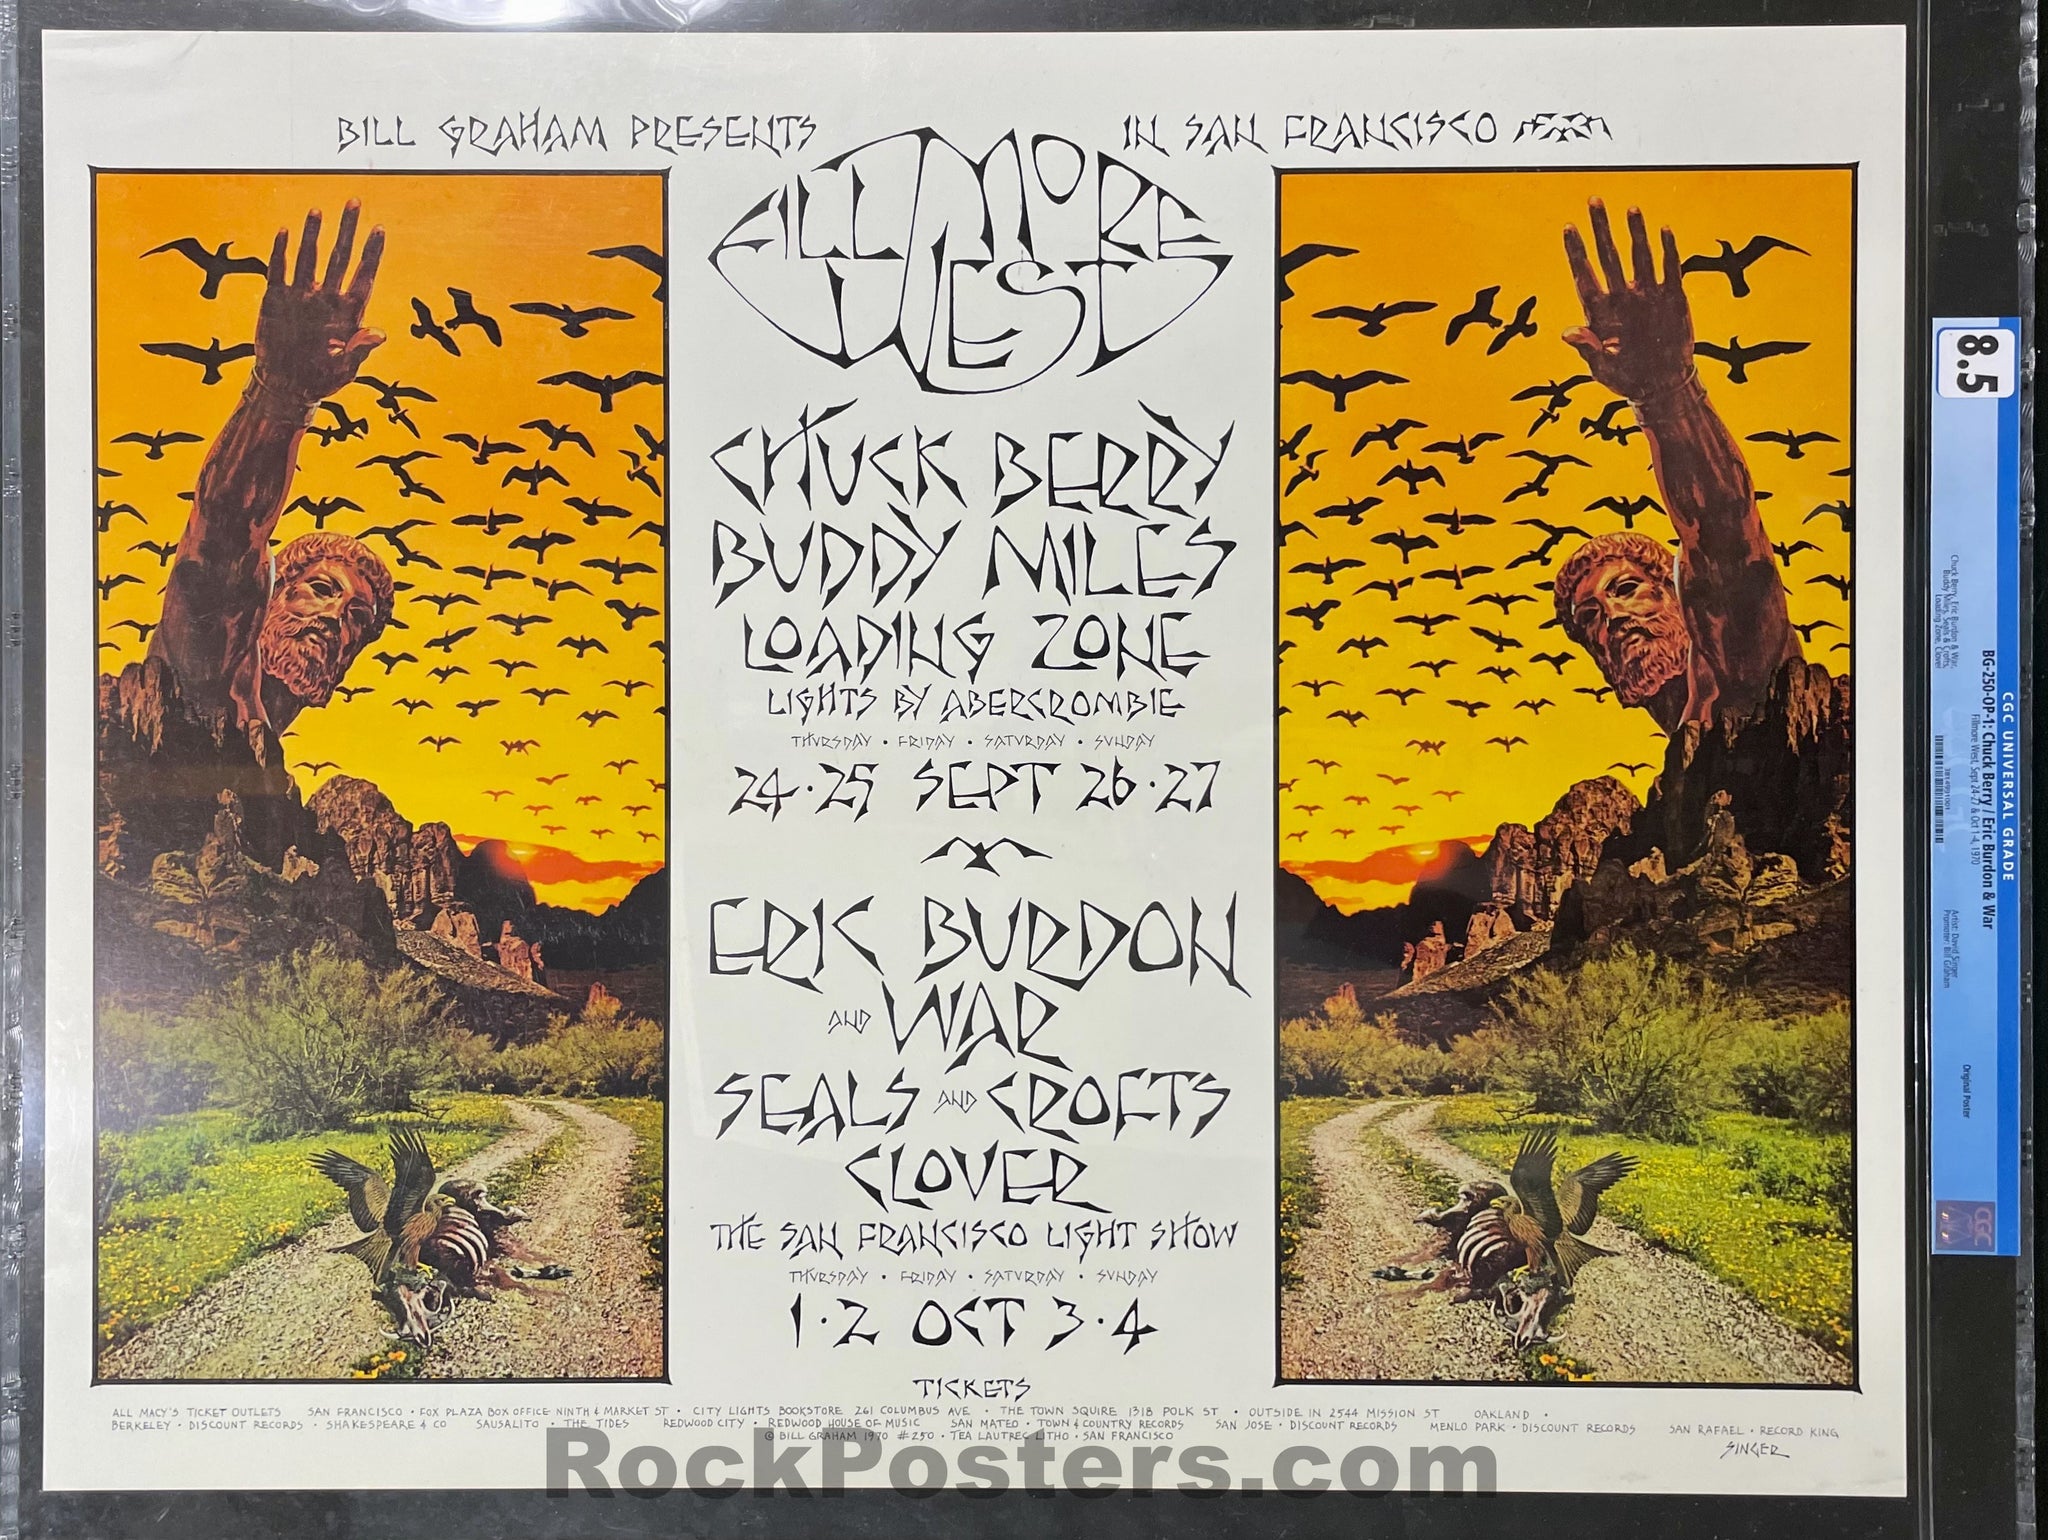 AUCTION - BG-250 - Chuck Berry Buddy Miles - 1970 Poster - Fillmore West - CGC Graded 8.5